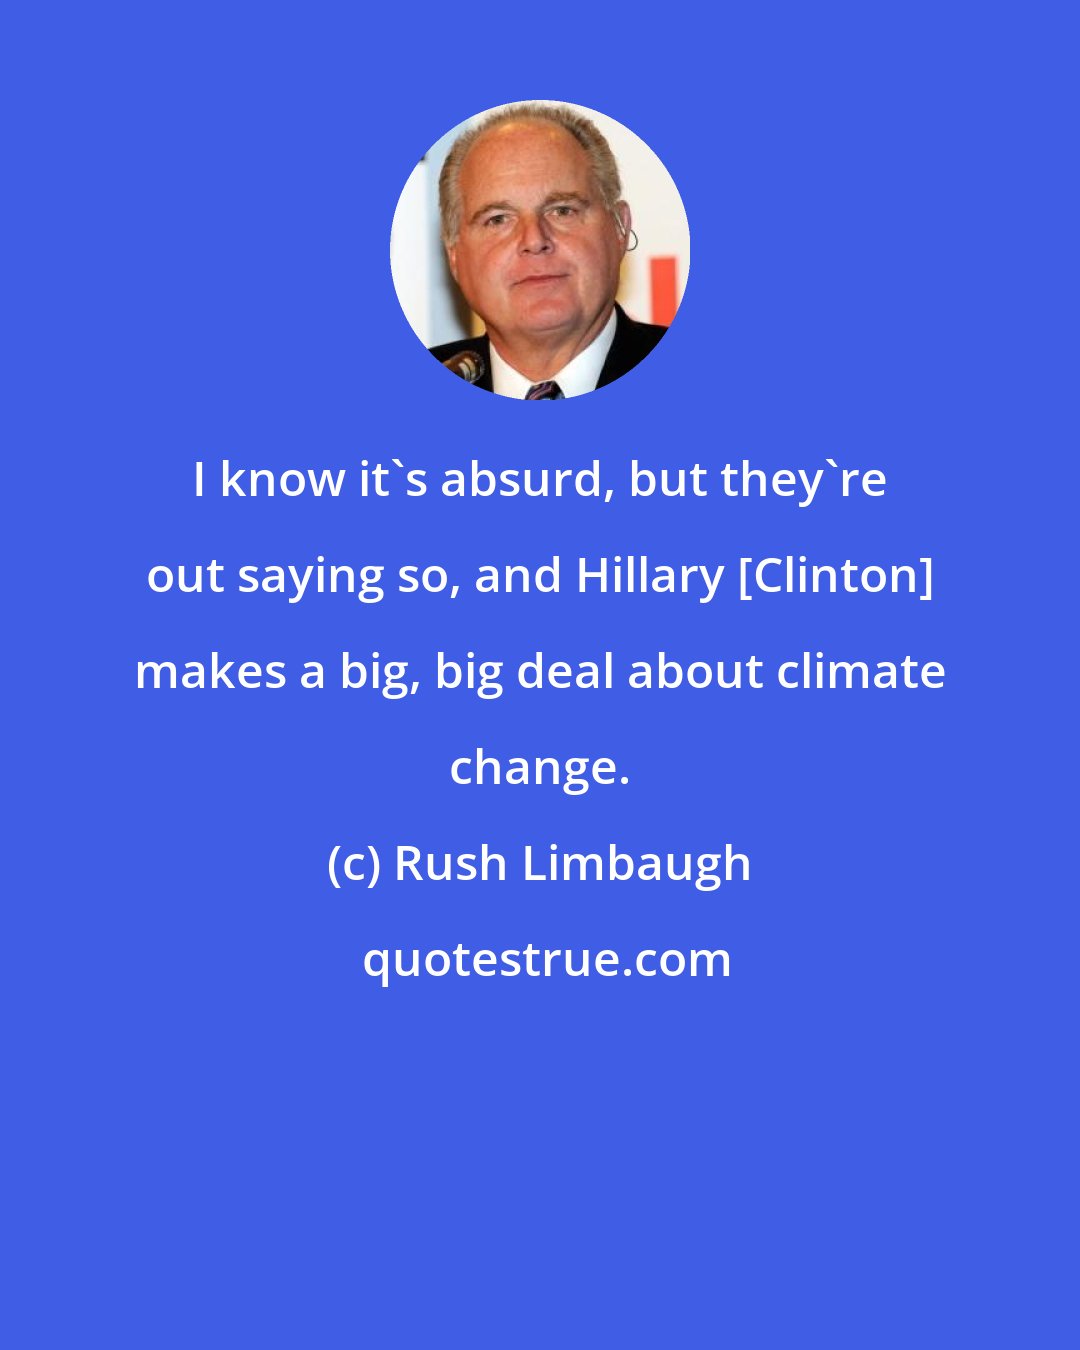 Rush Limbaugh: I know it's absurd, but they're out saying so, and Hillary [Clinton] makes a big, big deal about climate change.